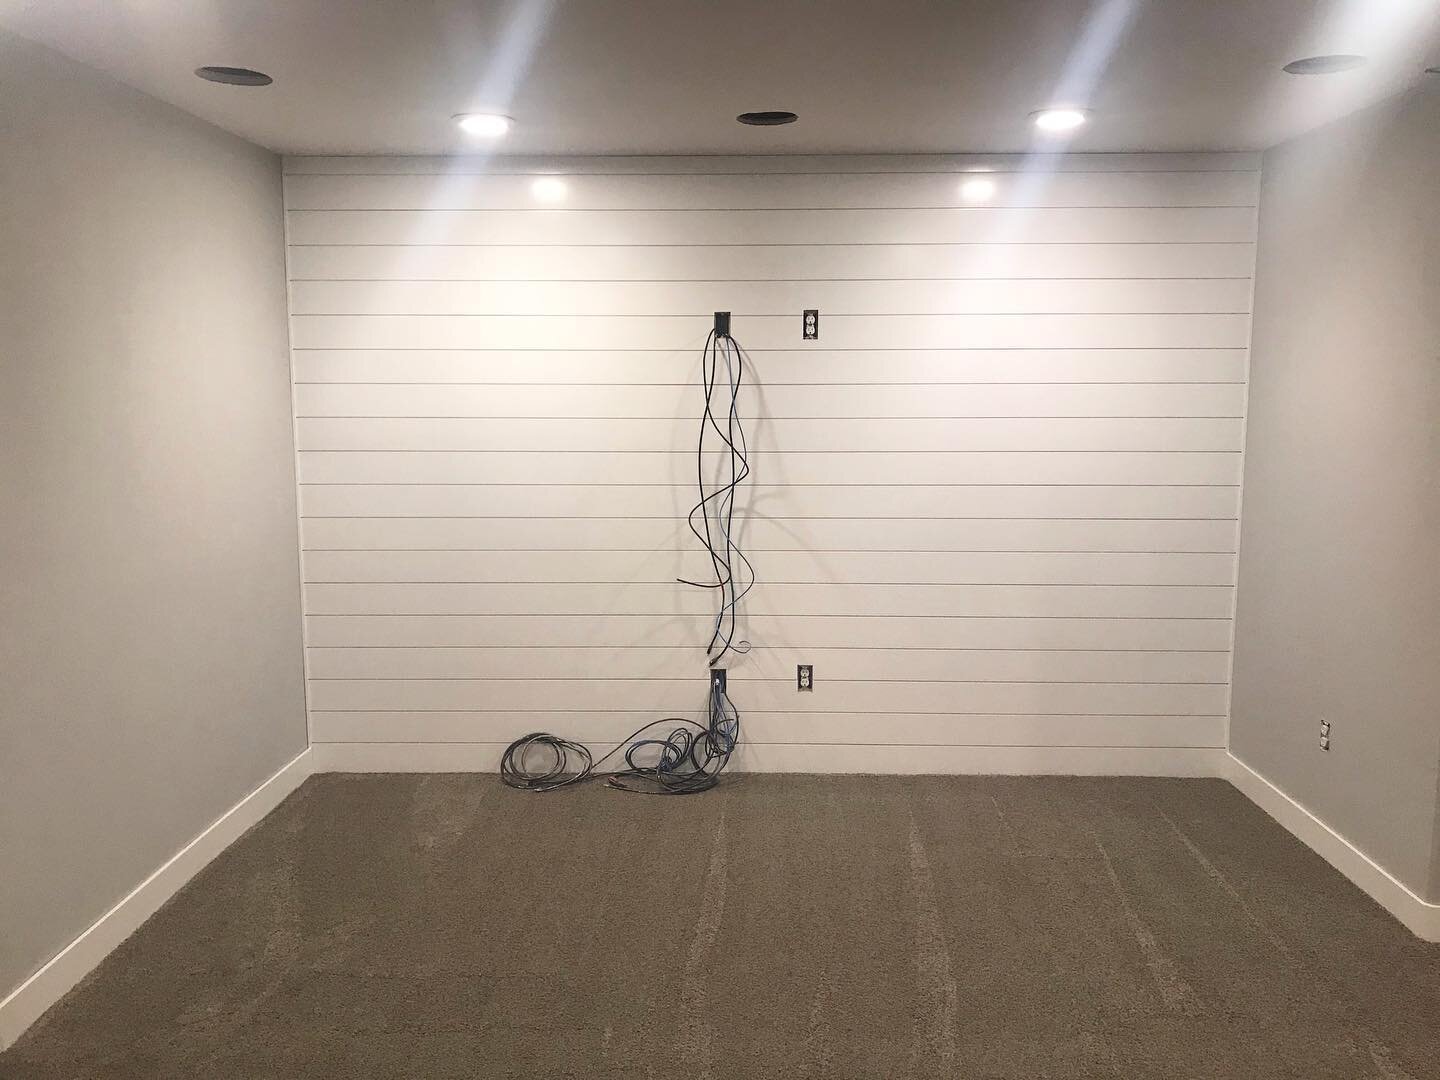 What kind of entertainment center do you envision for this shiplap wall? 
Such a fun focal feature that brightens up this full basement finish that is being completed very soon!